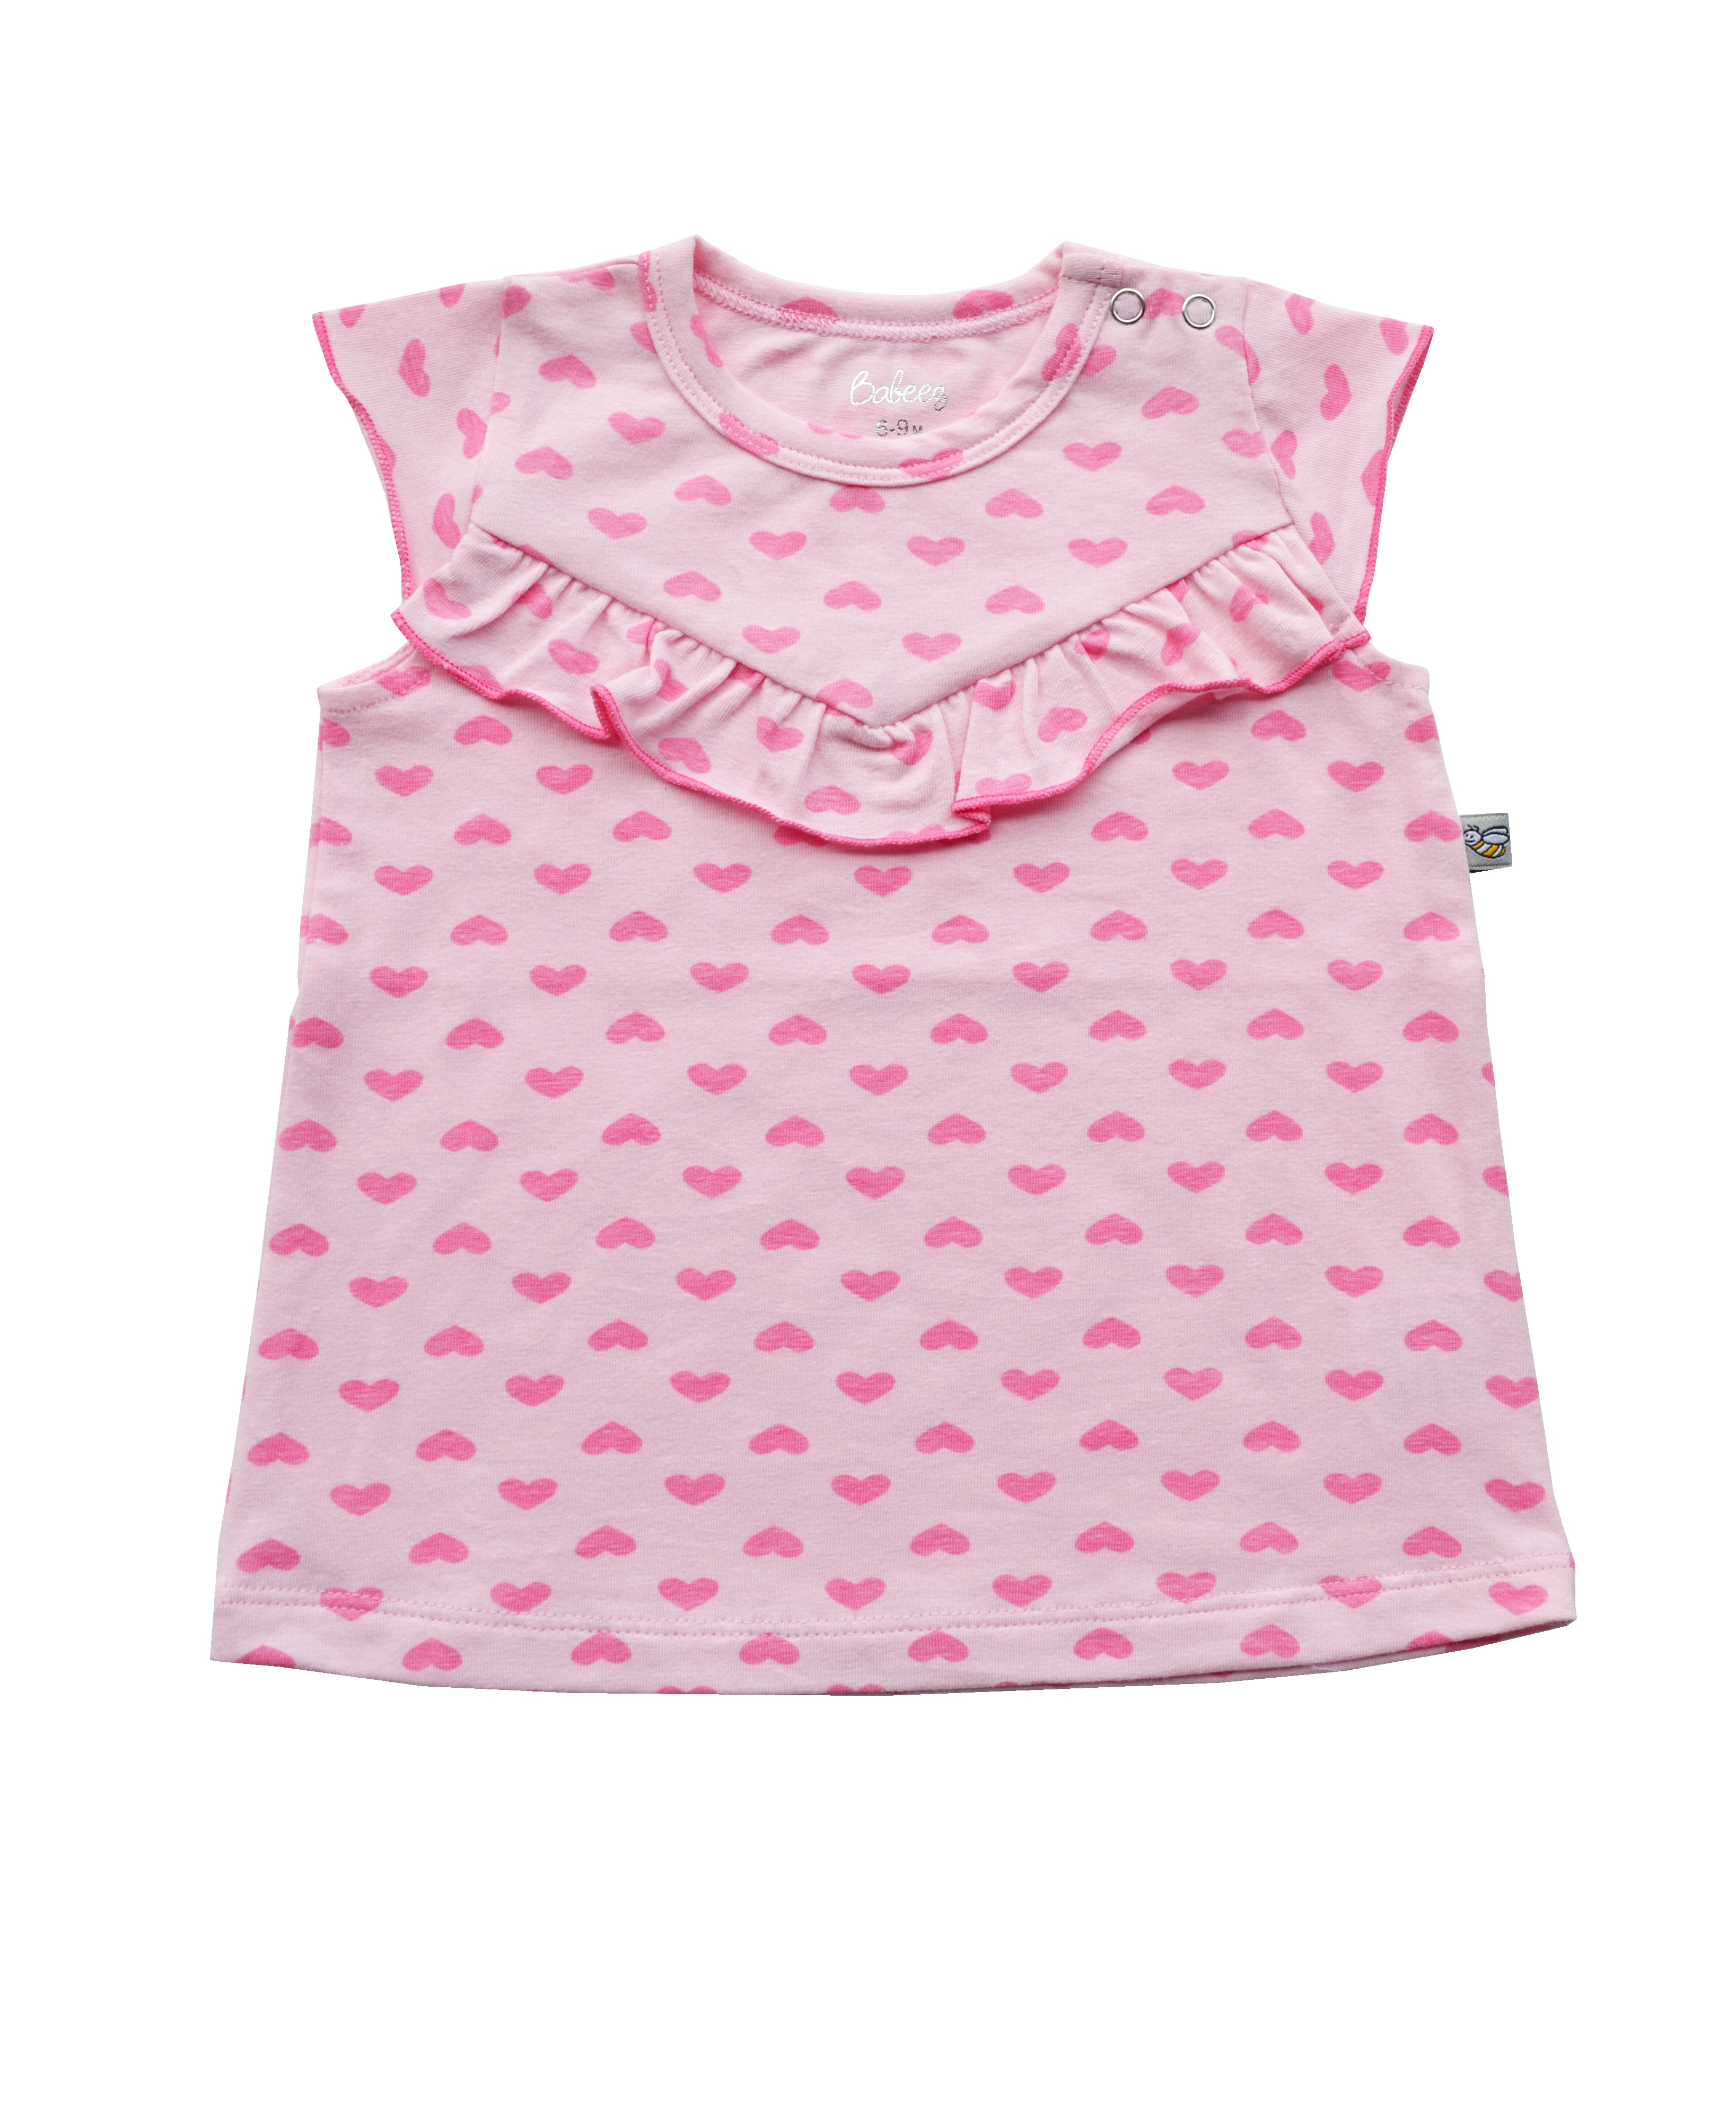 Babeez | Allover Heart Print on Pink Sleeveless Top (95% Cotton 5% Elasthan Jersey) undefined